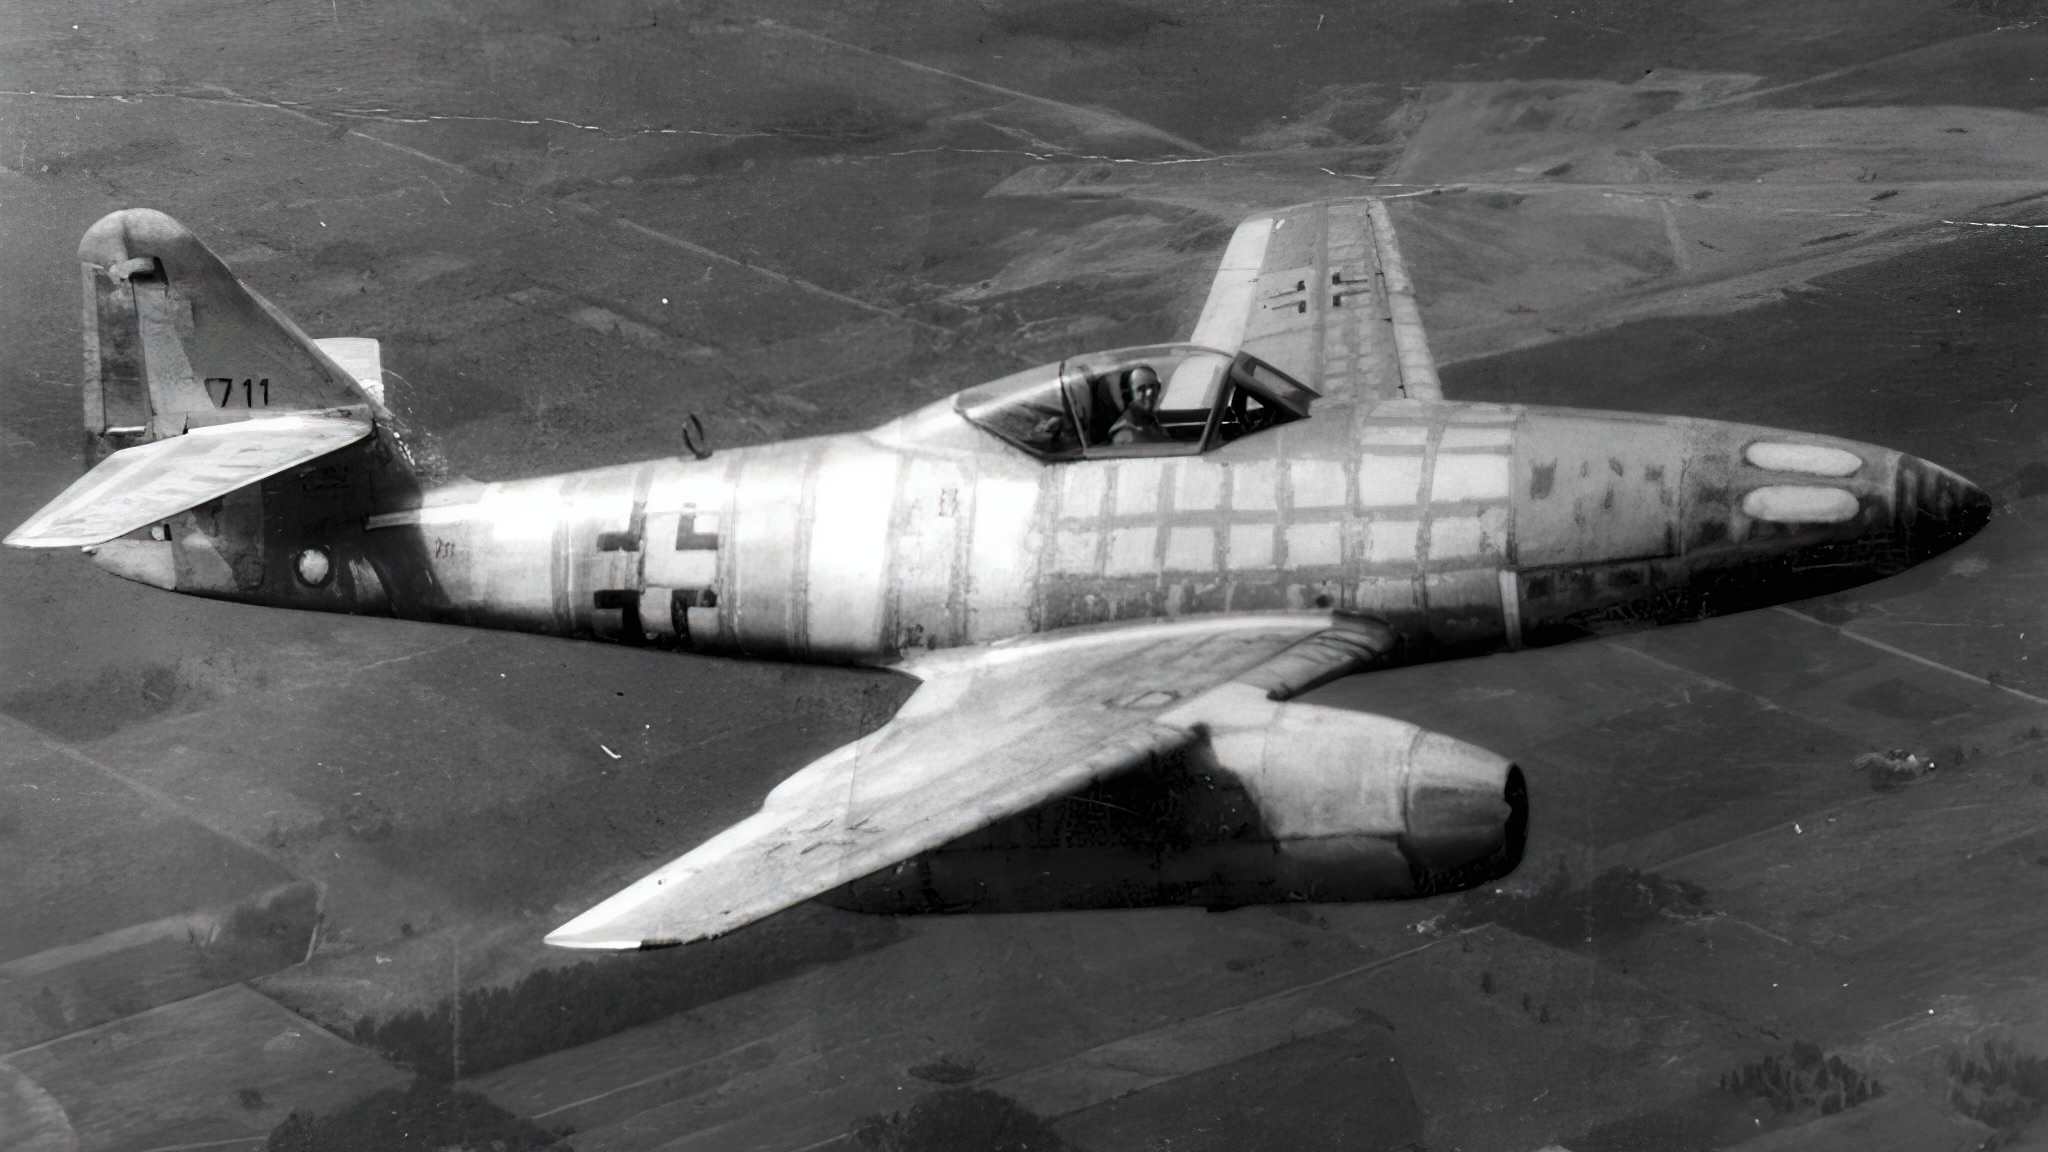 Messerschmitt Me 262 Werk-Nr. 111711, seen here post-war during a test flight in the USA. It was the first intact Me 262 to fall into Allied hands on March 31st 1945